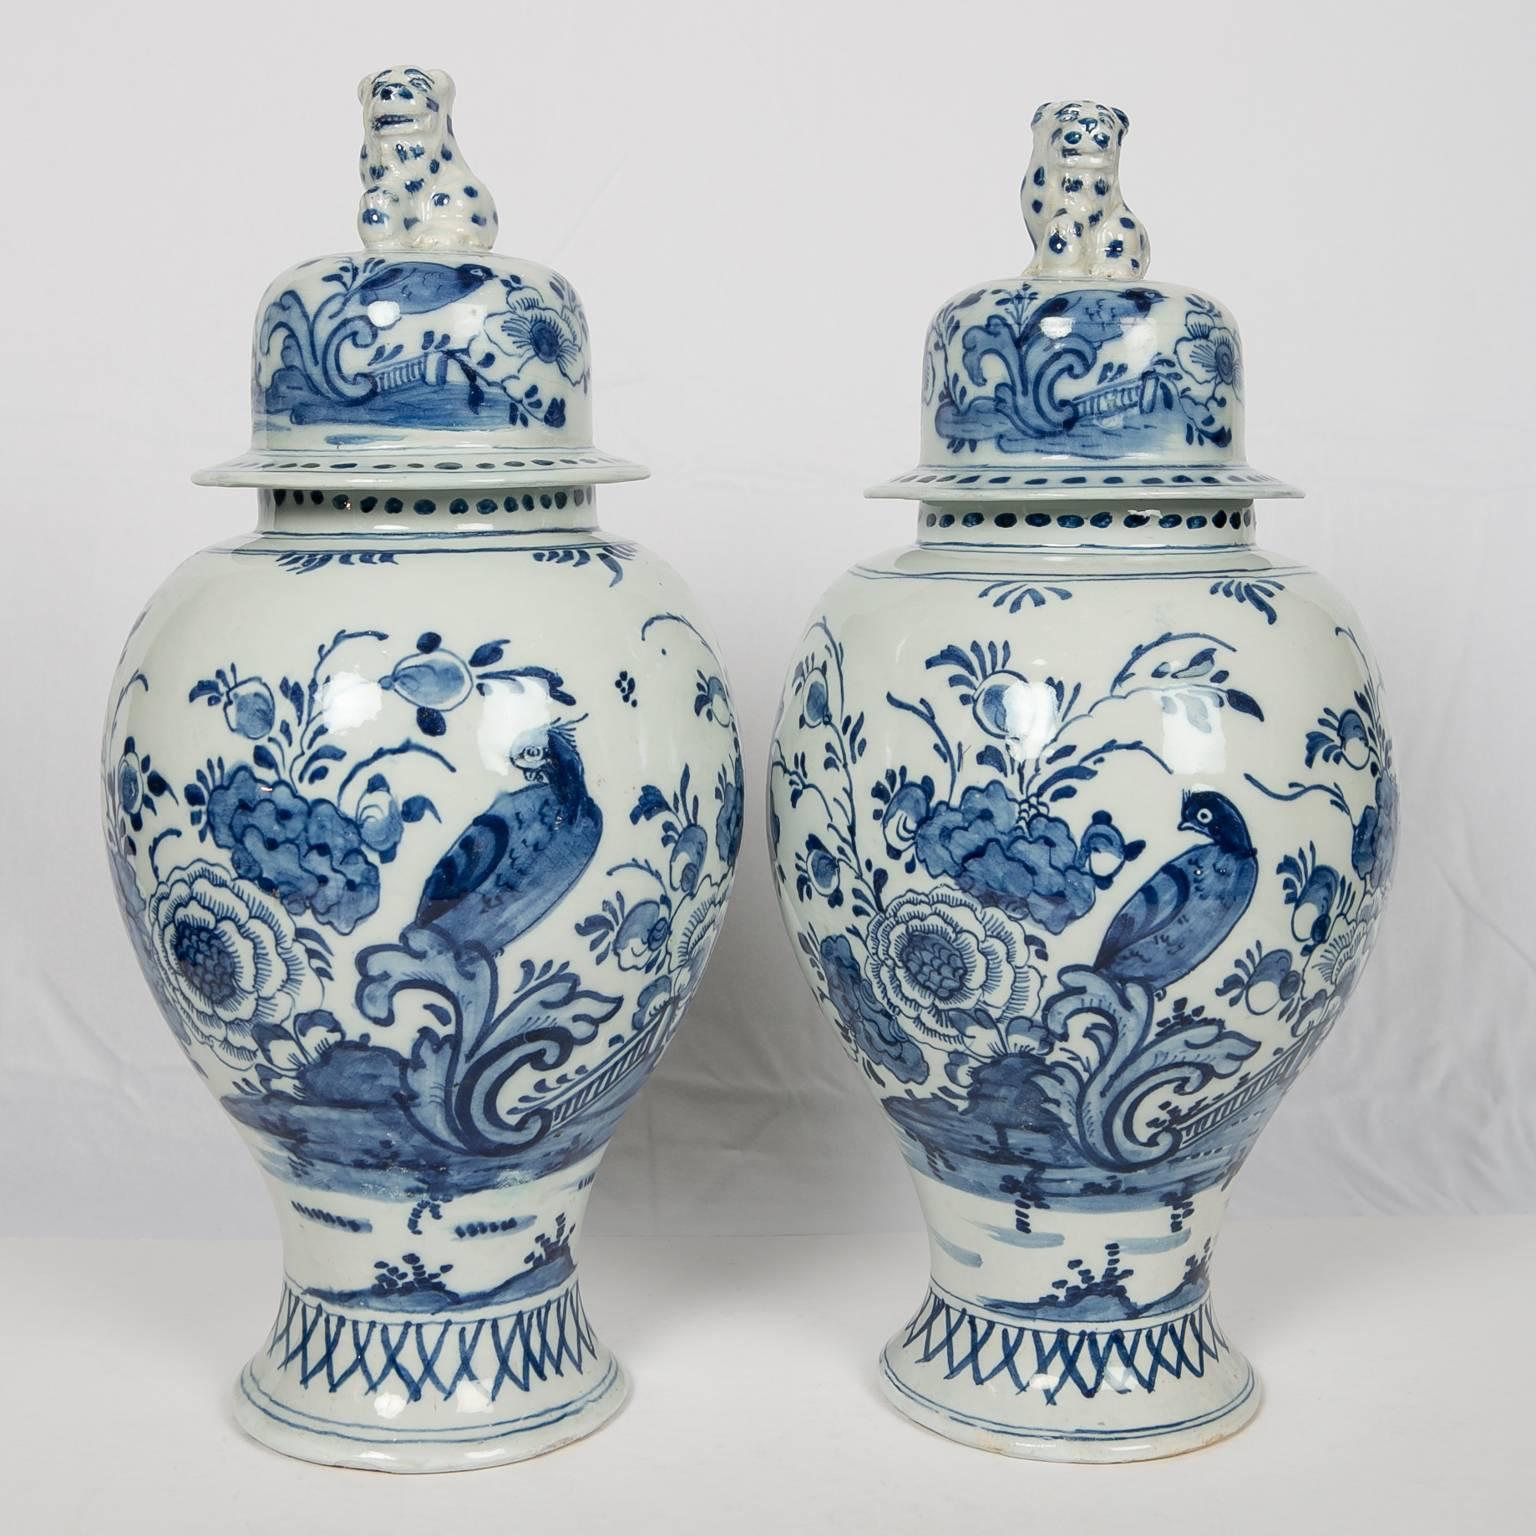 A pair of blue and white Dutch Delft mantle jars painted with
an all around scene showing a songbird in a garden
filled with peonies. The cover is similarly decorated and topped
by a whimsical leopard finial.
Dimensions 15 inches tall x 7 inches